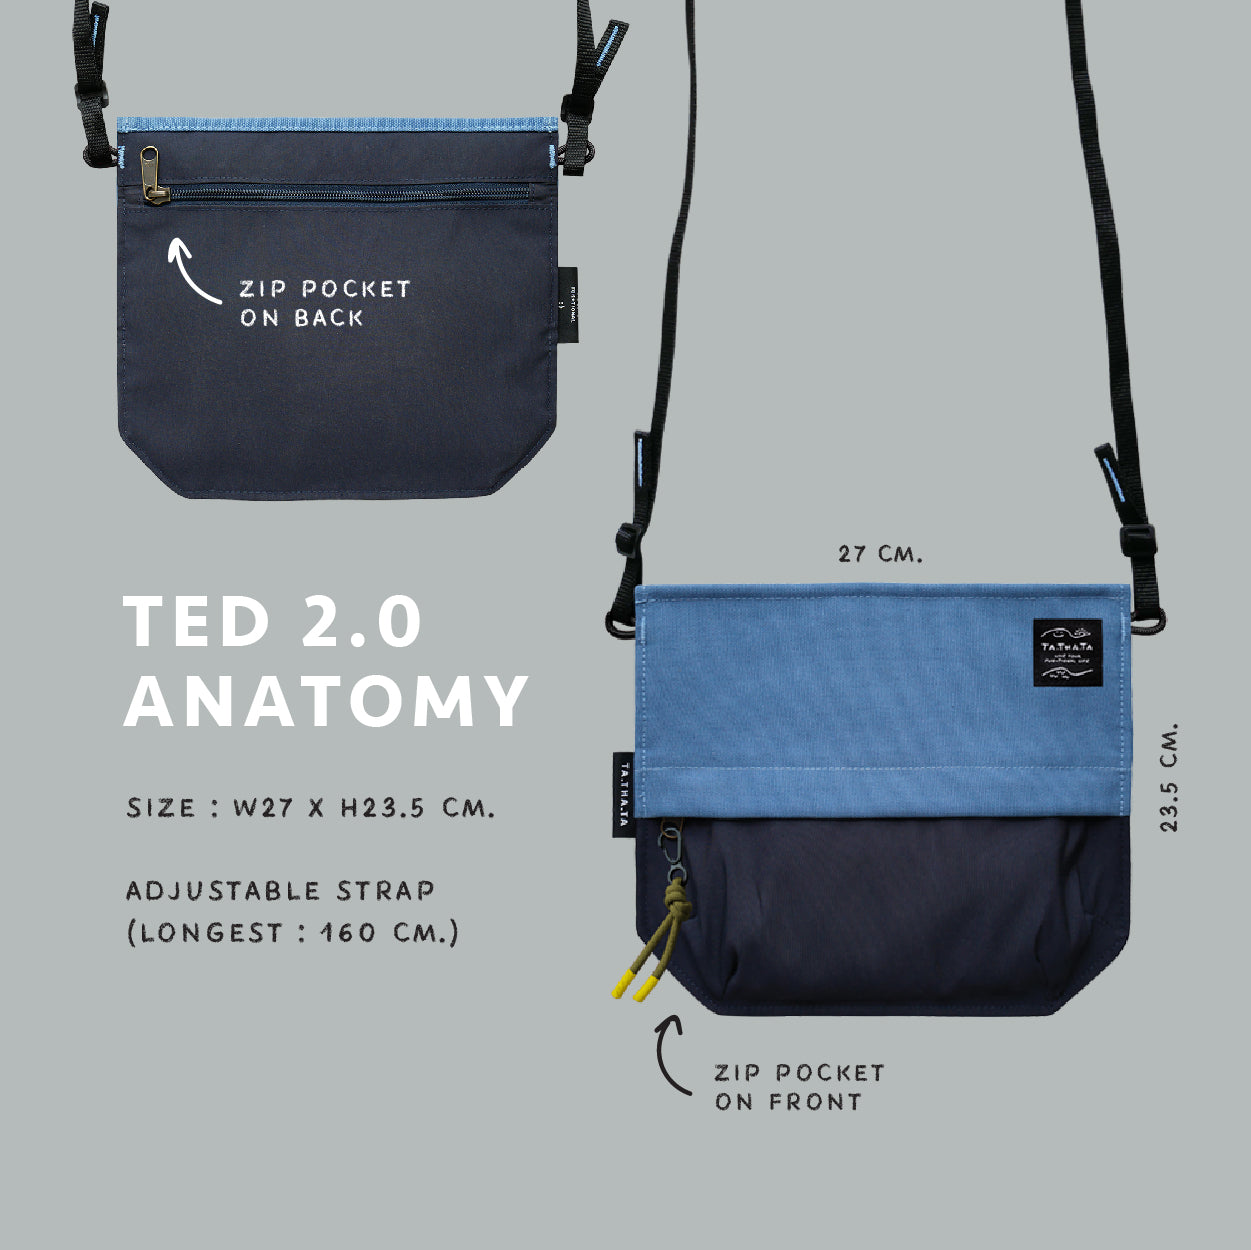 Ted midnight bag